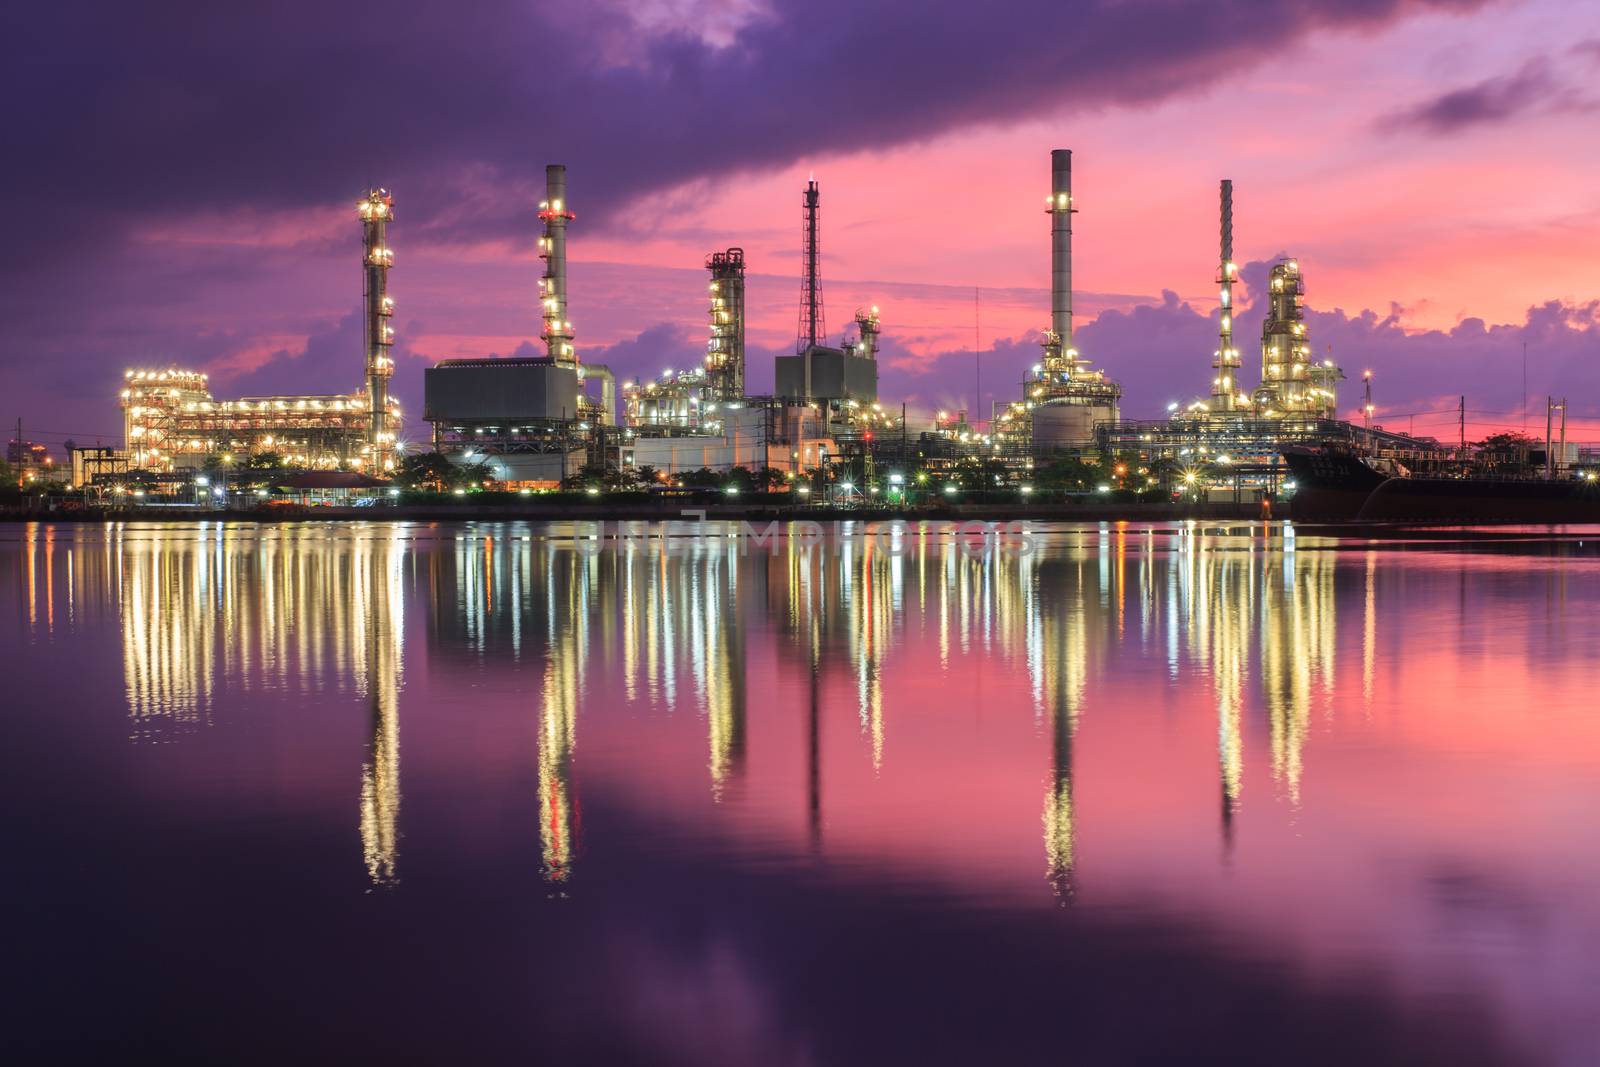 Oil refinery industry plant at dramatic twilight in morning